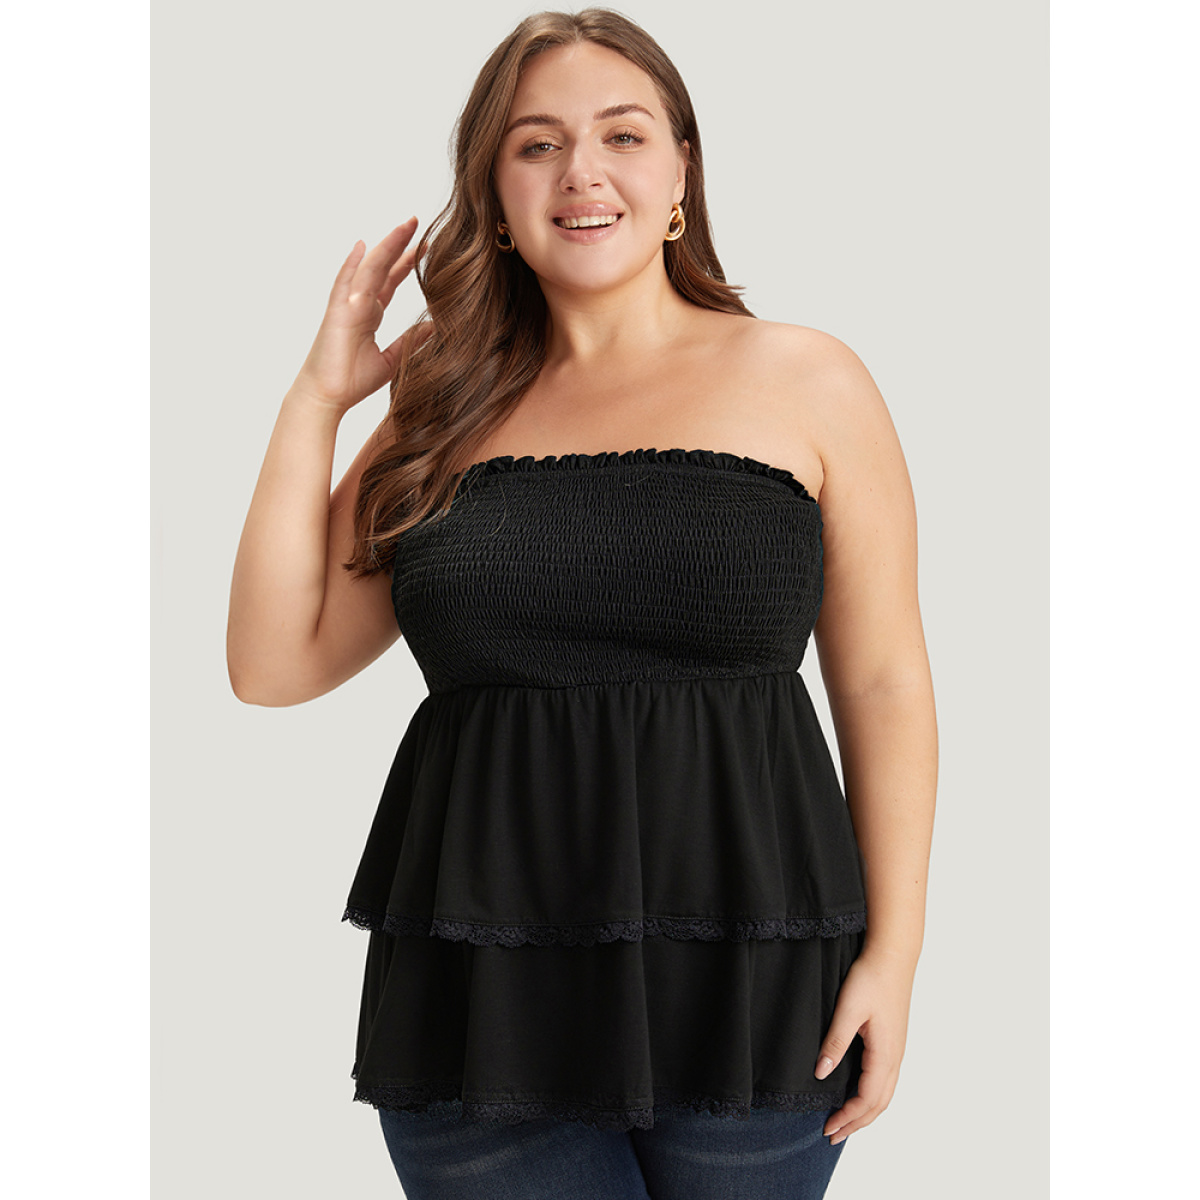 

Plus Size Solid Frill Trim Shirred Lace Ruffle Layered Tank Top Women Black Elegant Frill Trim One-shoulder neck Dailywear Tank Tops Camis BloomChic